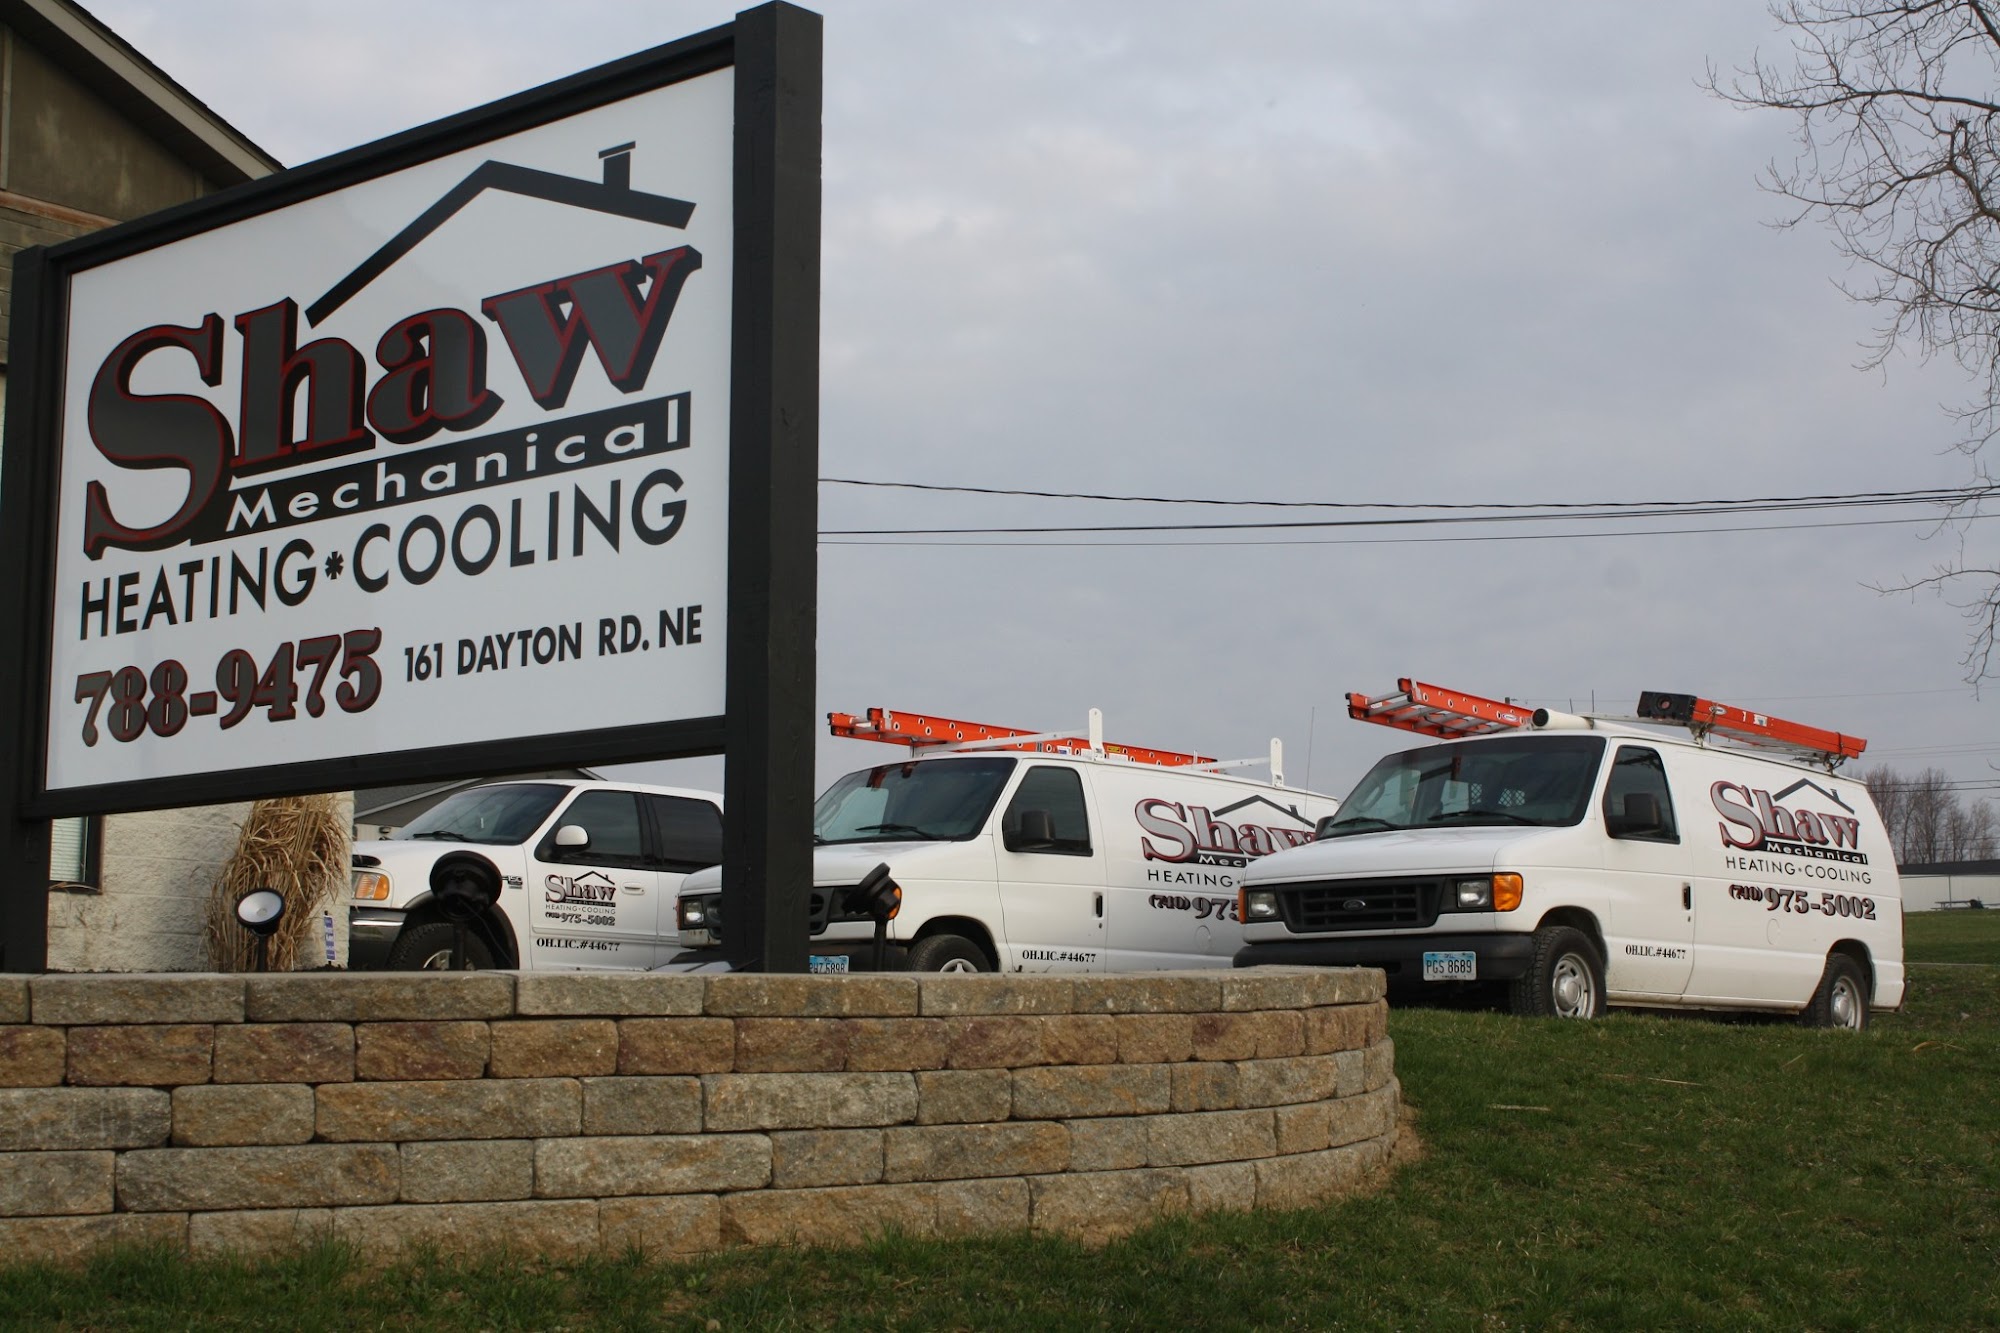 Shaw Mechanical Heating & Cooling